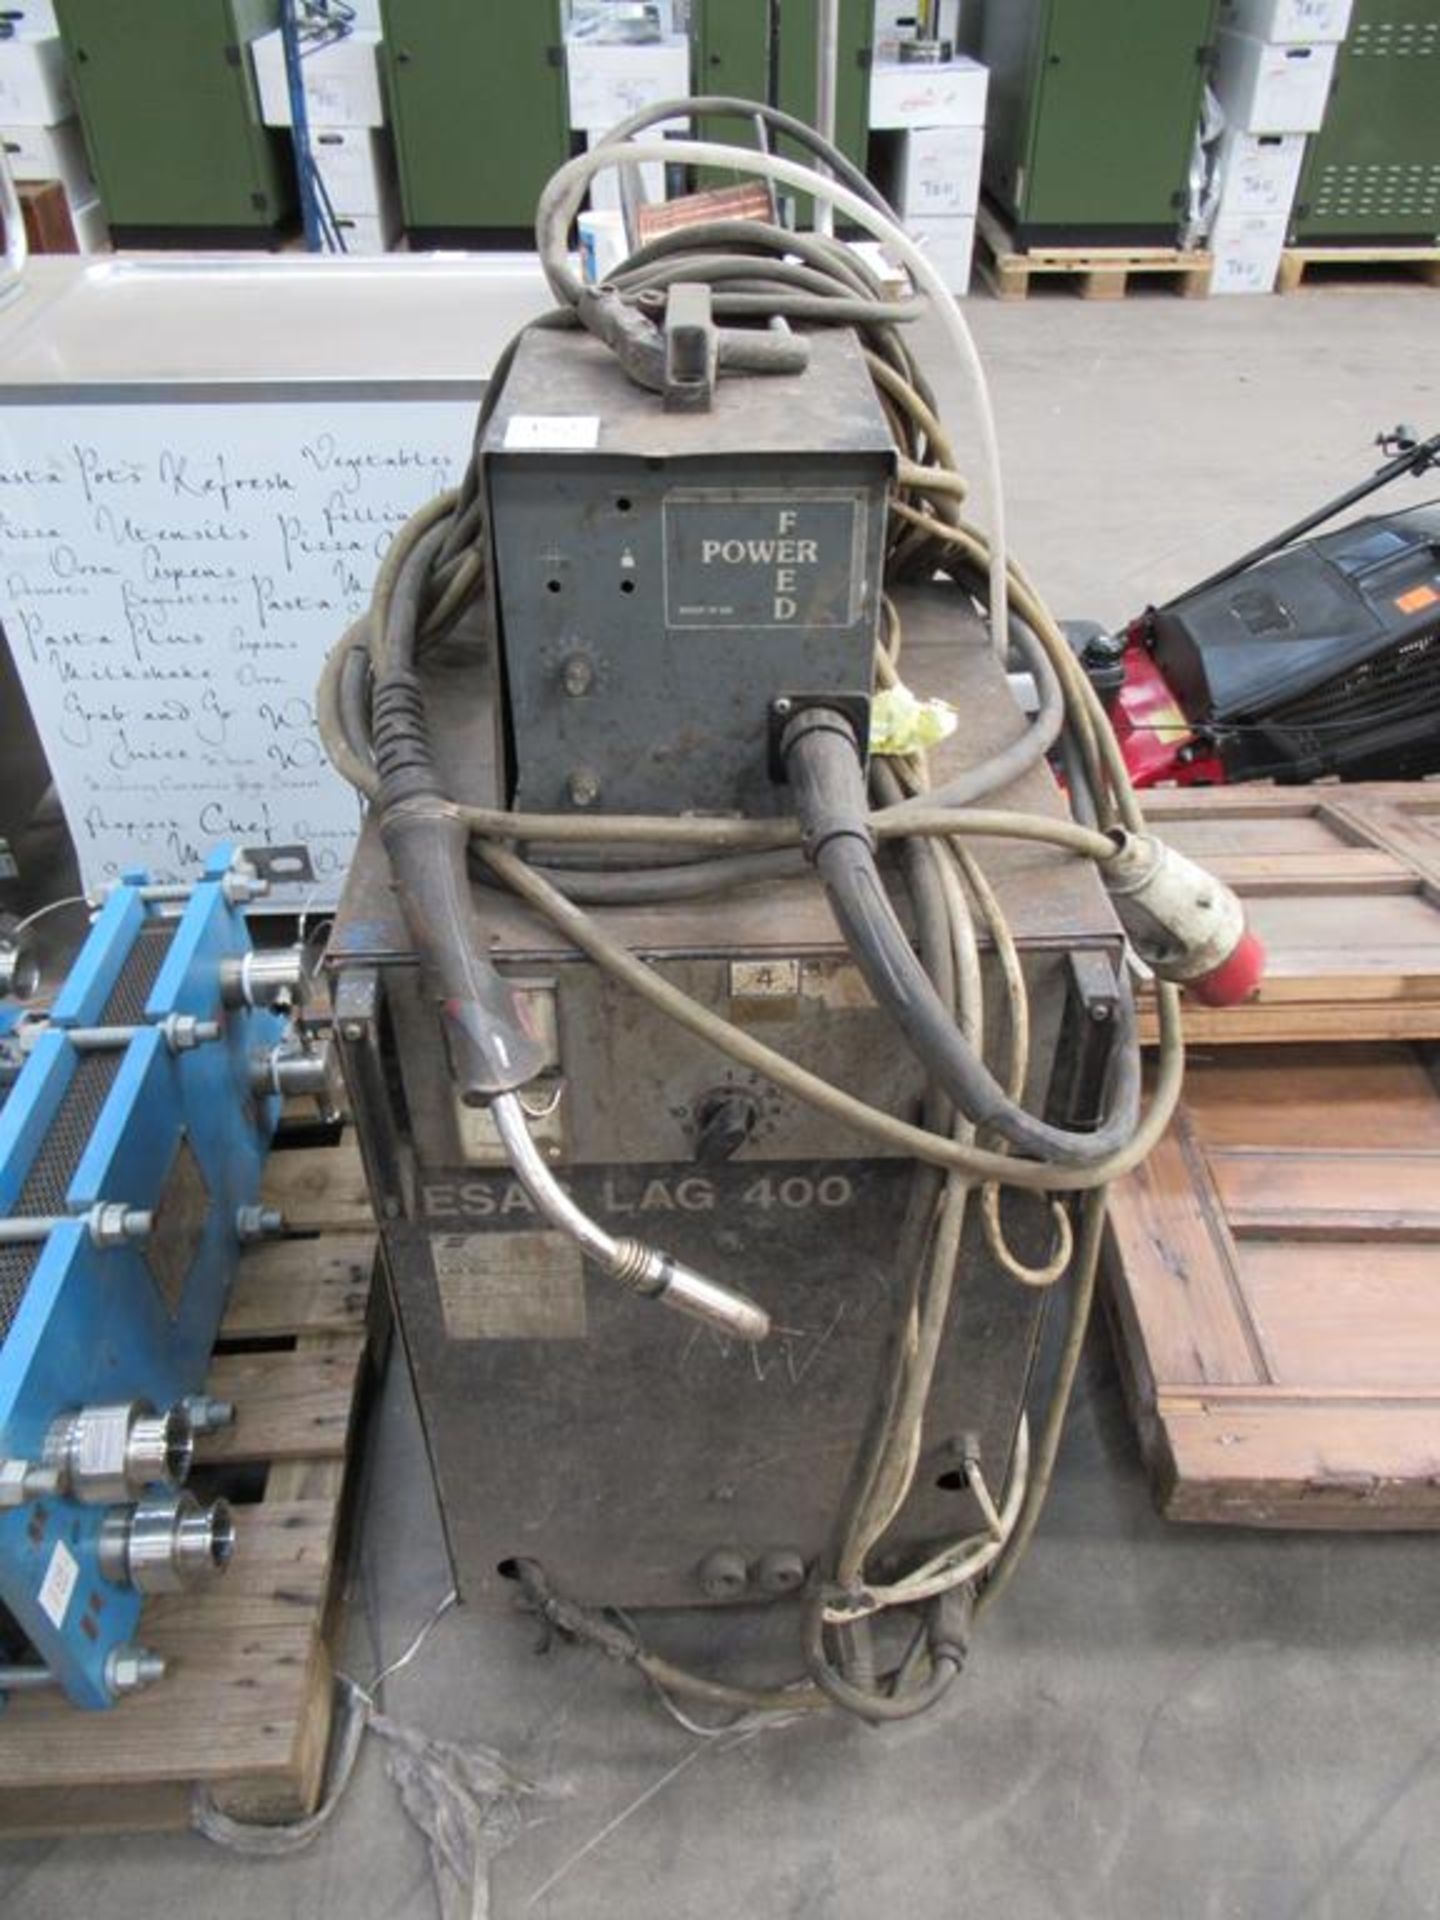 An ESAB Lag 400 3PH Welder complete with Wire Feed